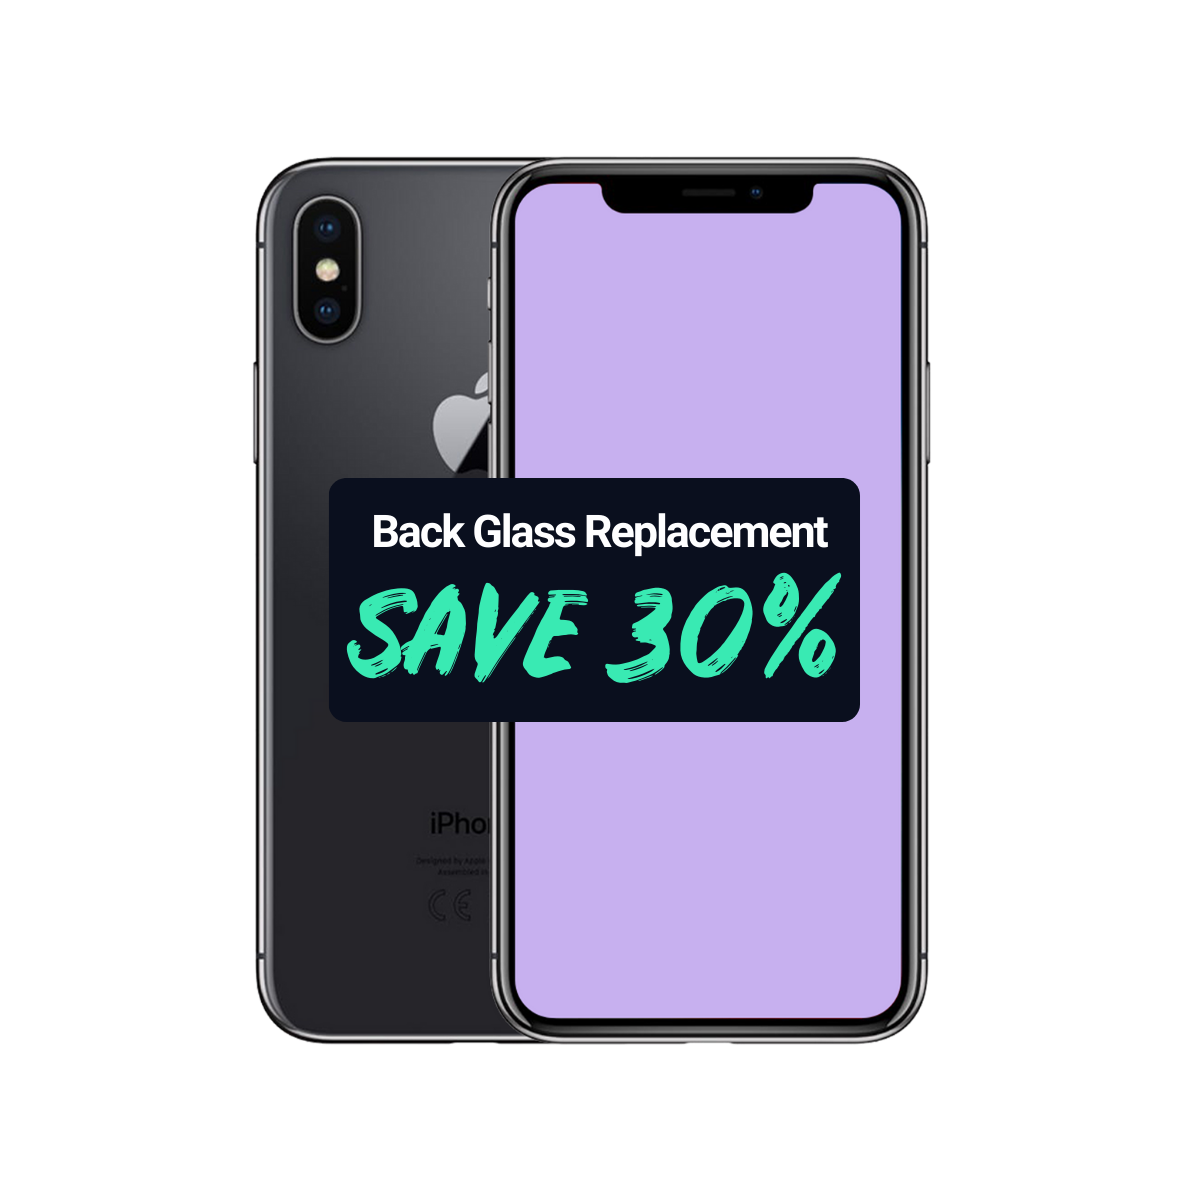 iPhone XS Back Glass Replacement Voucher